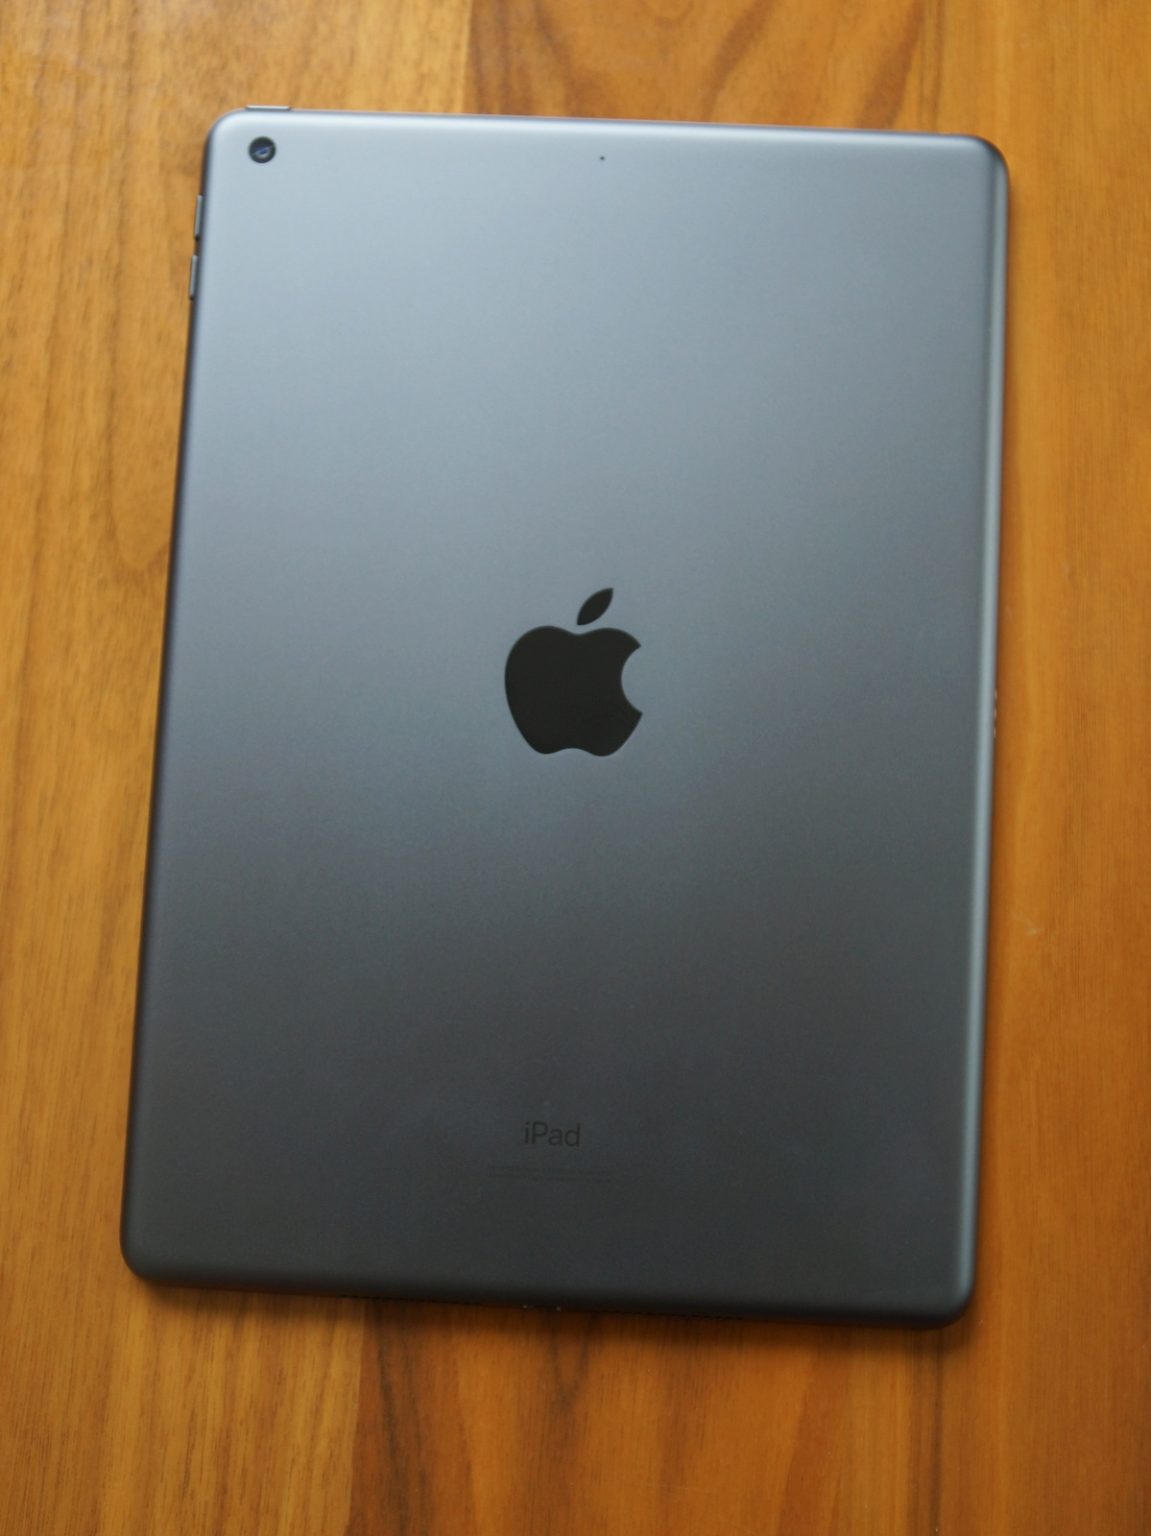 Apple iPad 10.2 inch 8th Gen 32GB Wi-Fi Space Gray (As New) With New Battery & Shipping